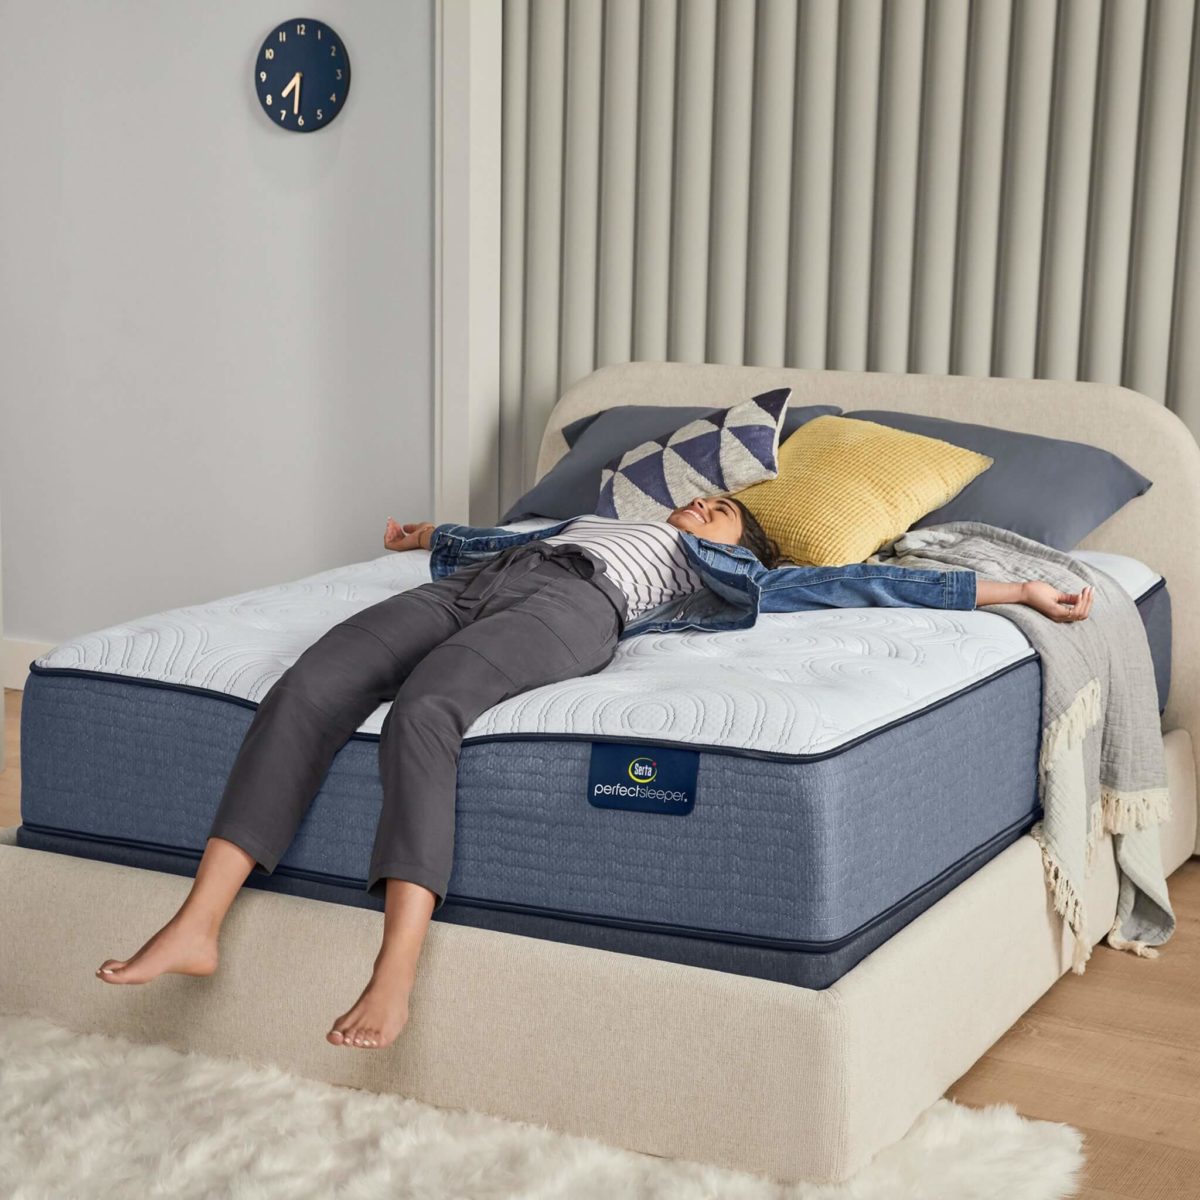 11 Best Mattress Brands Must Read This Before Buying